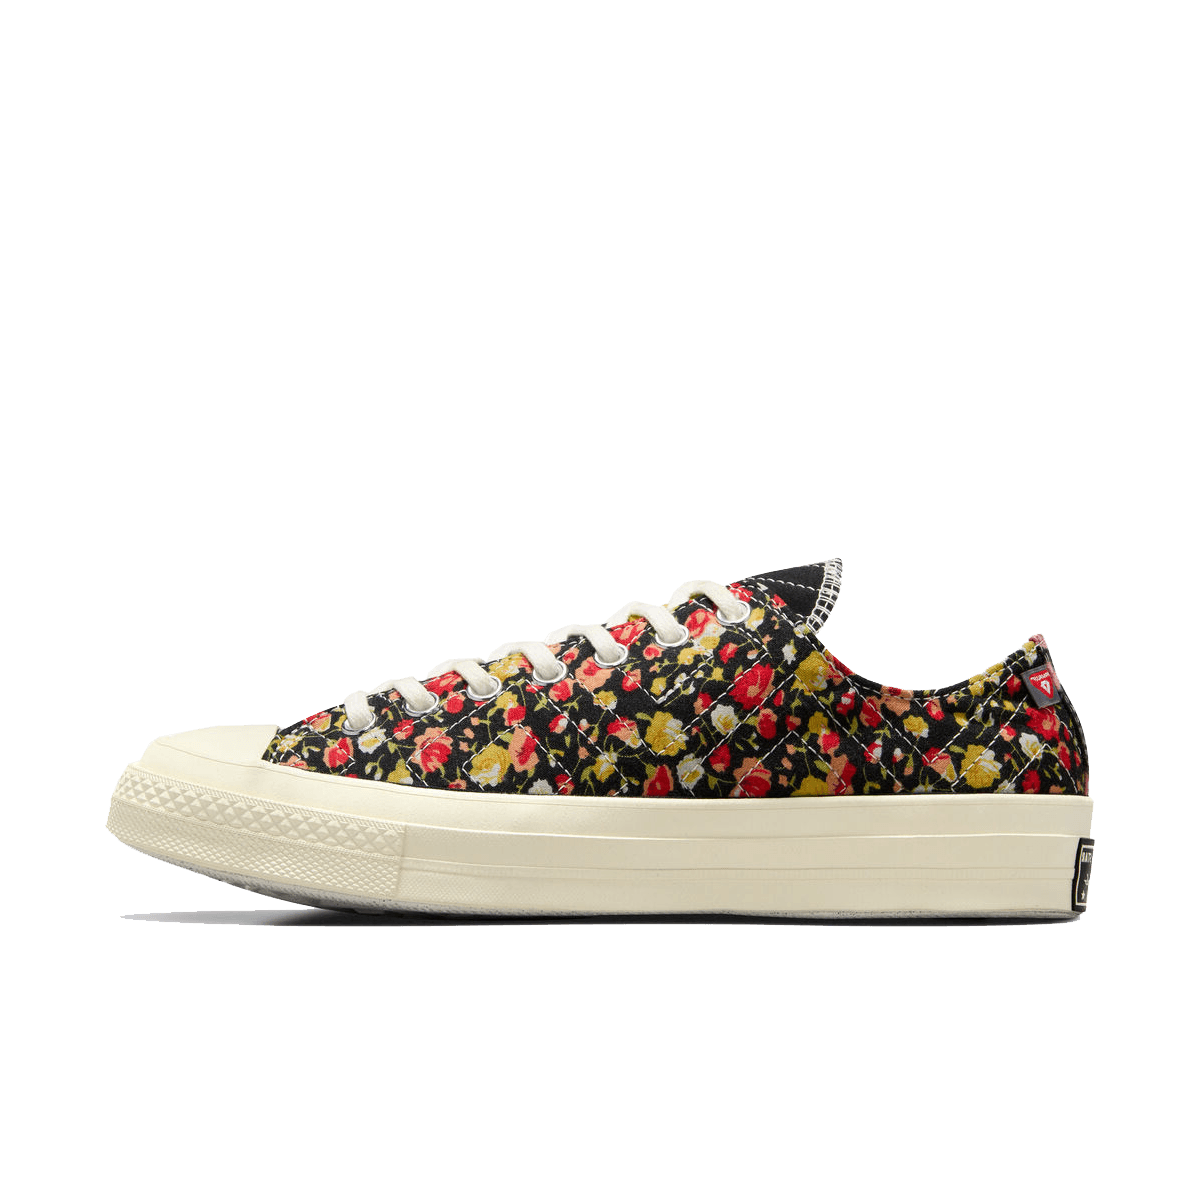 Converse Chuck 70 Low Upcycled 'Floral' A04618C